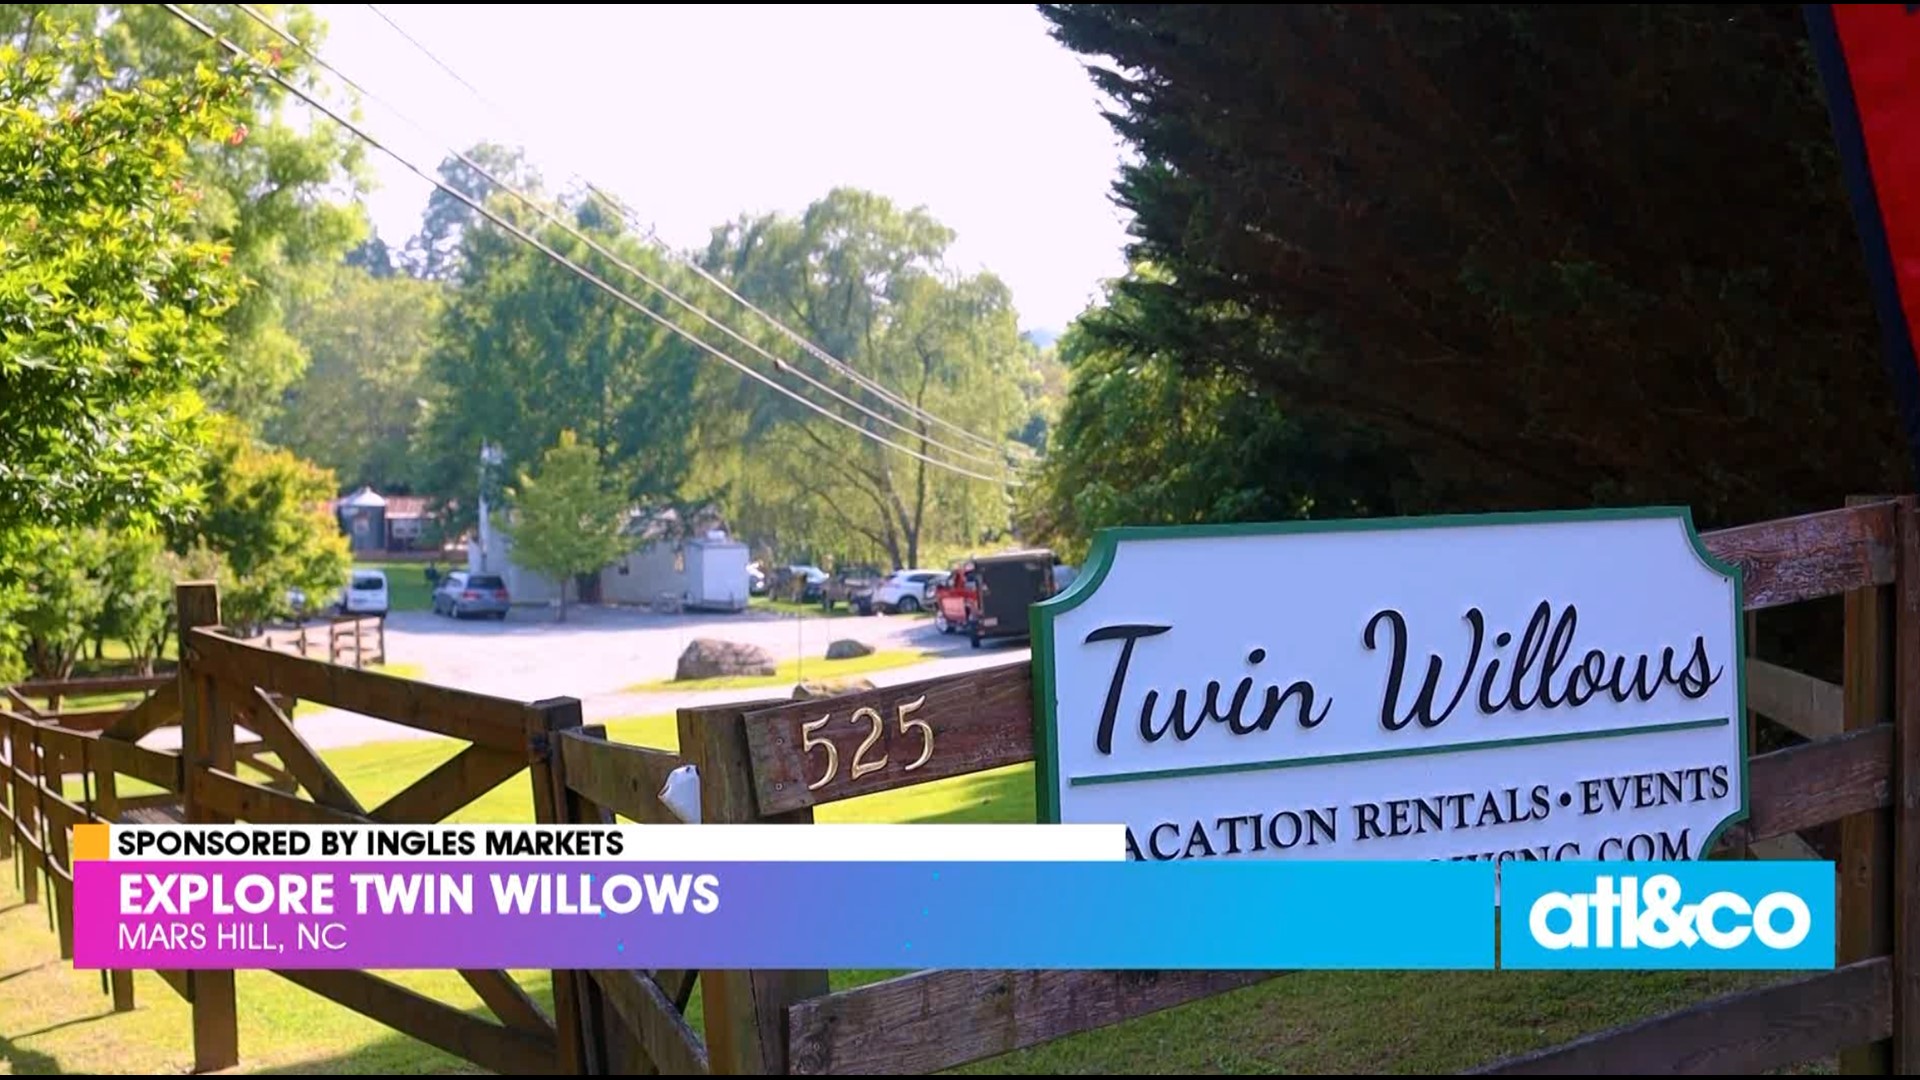 Explore Twin Willows Vacation Rentals on the Ingles Open Road - Paid Content